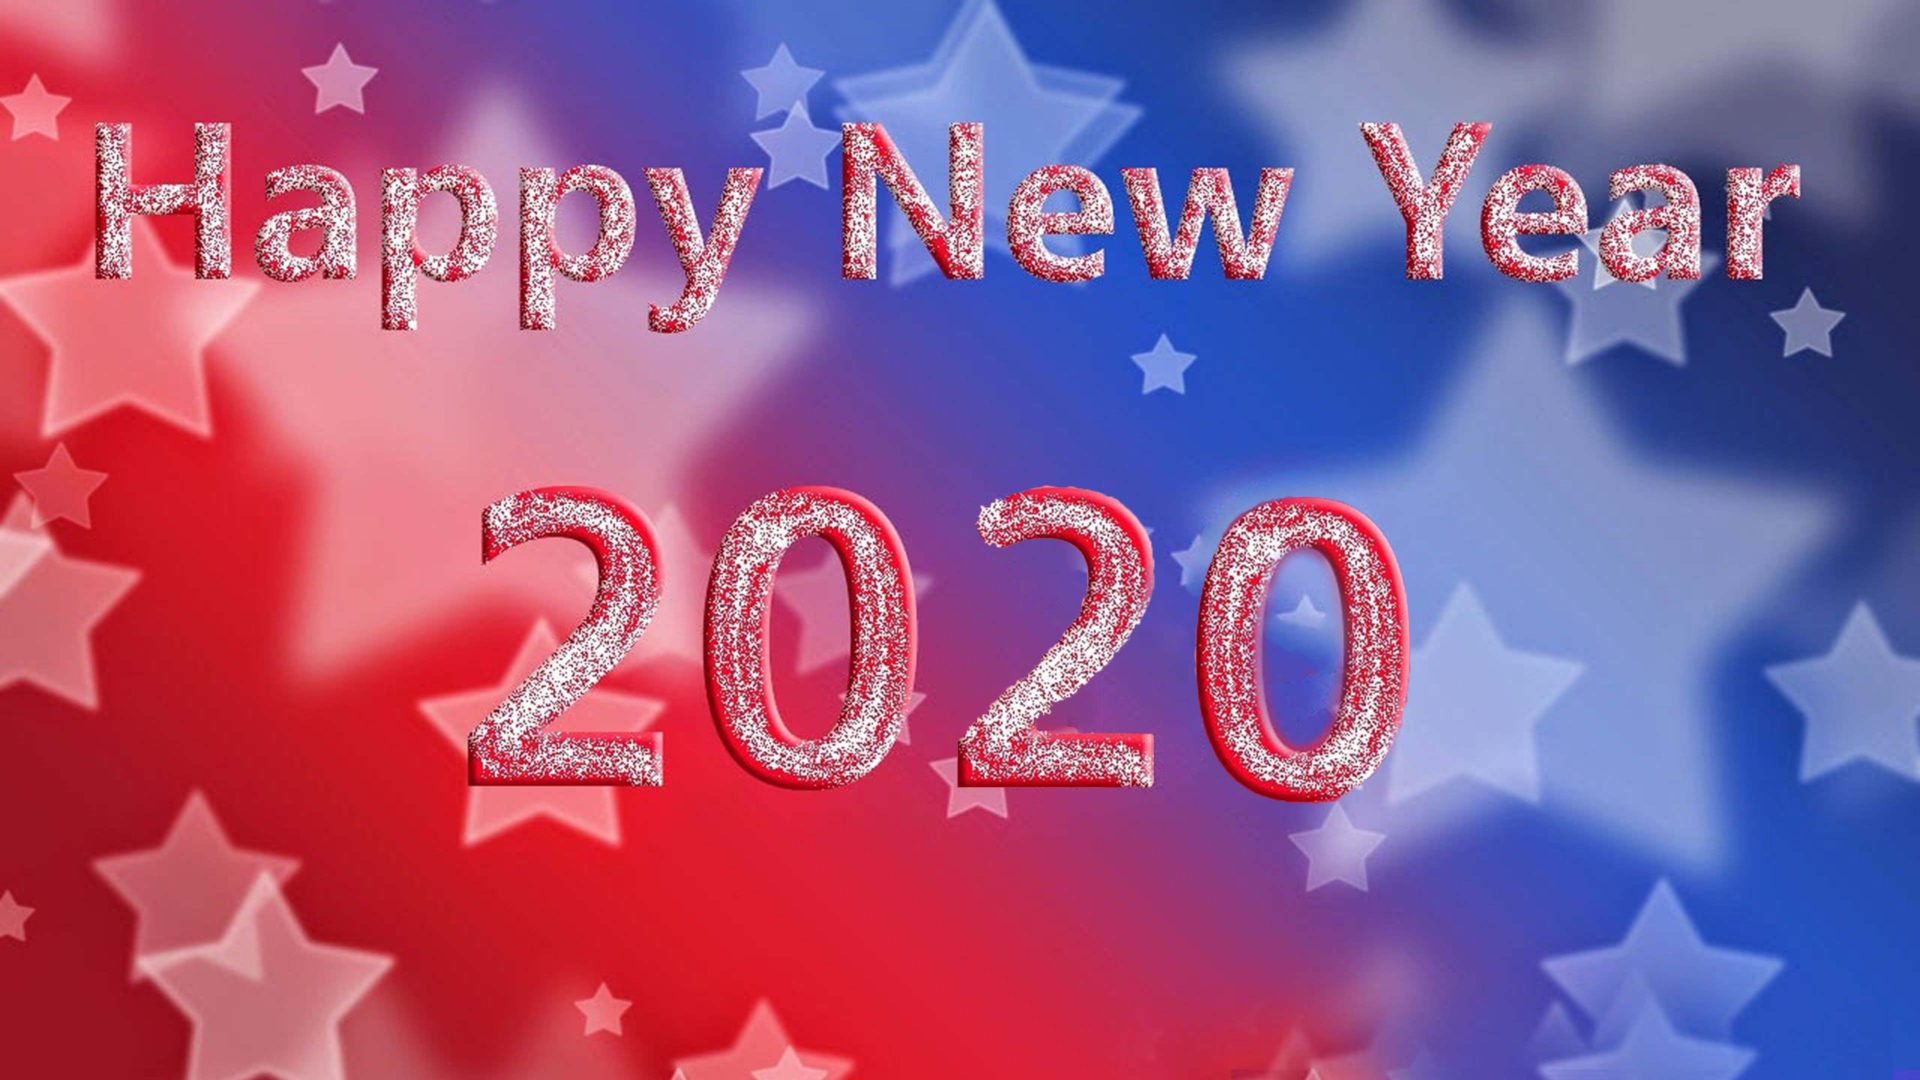 Happy New Year 2020 Greeting Card For Android Mobile Phones Hd